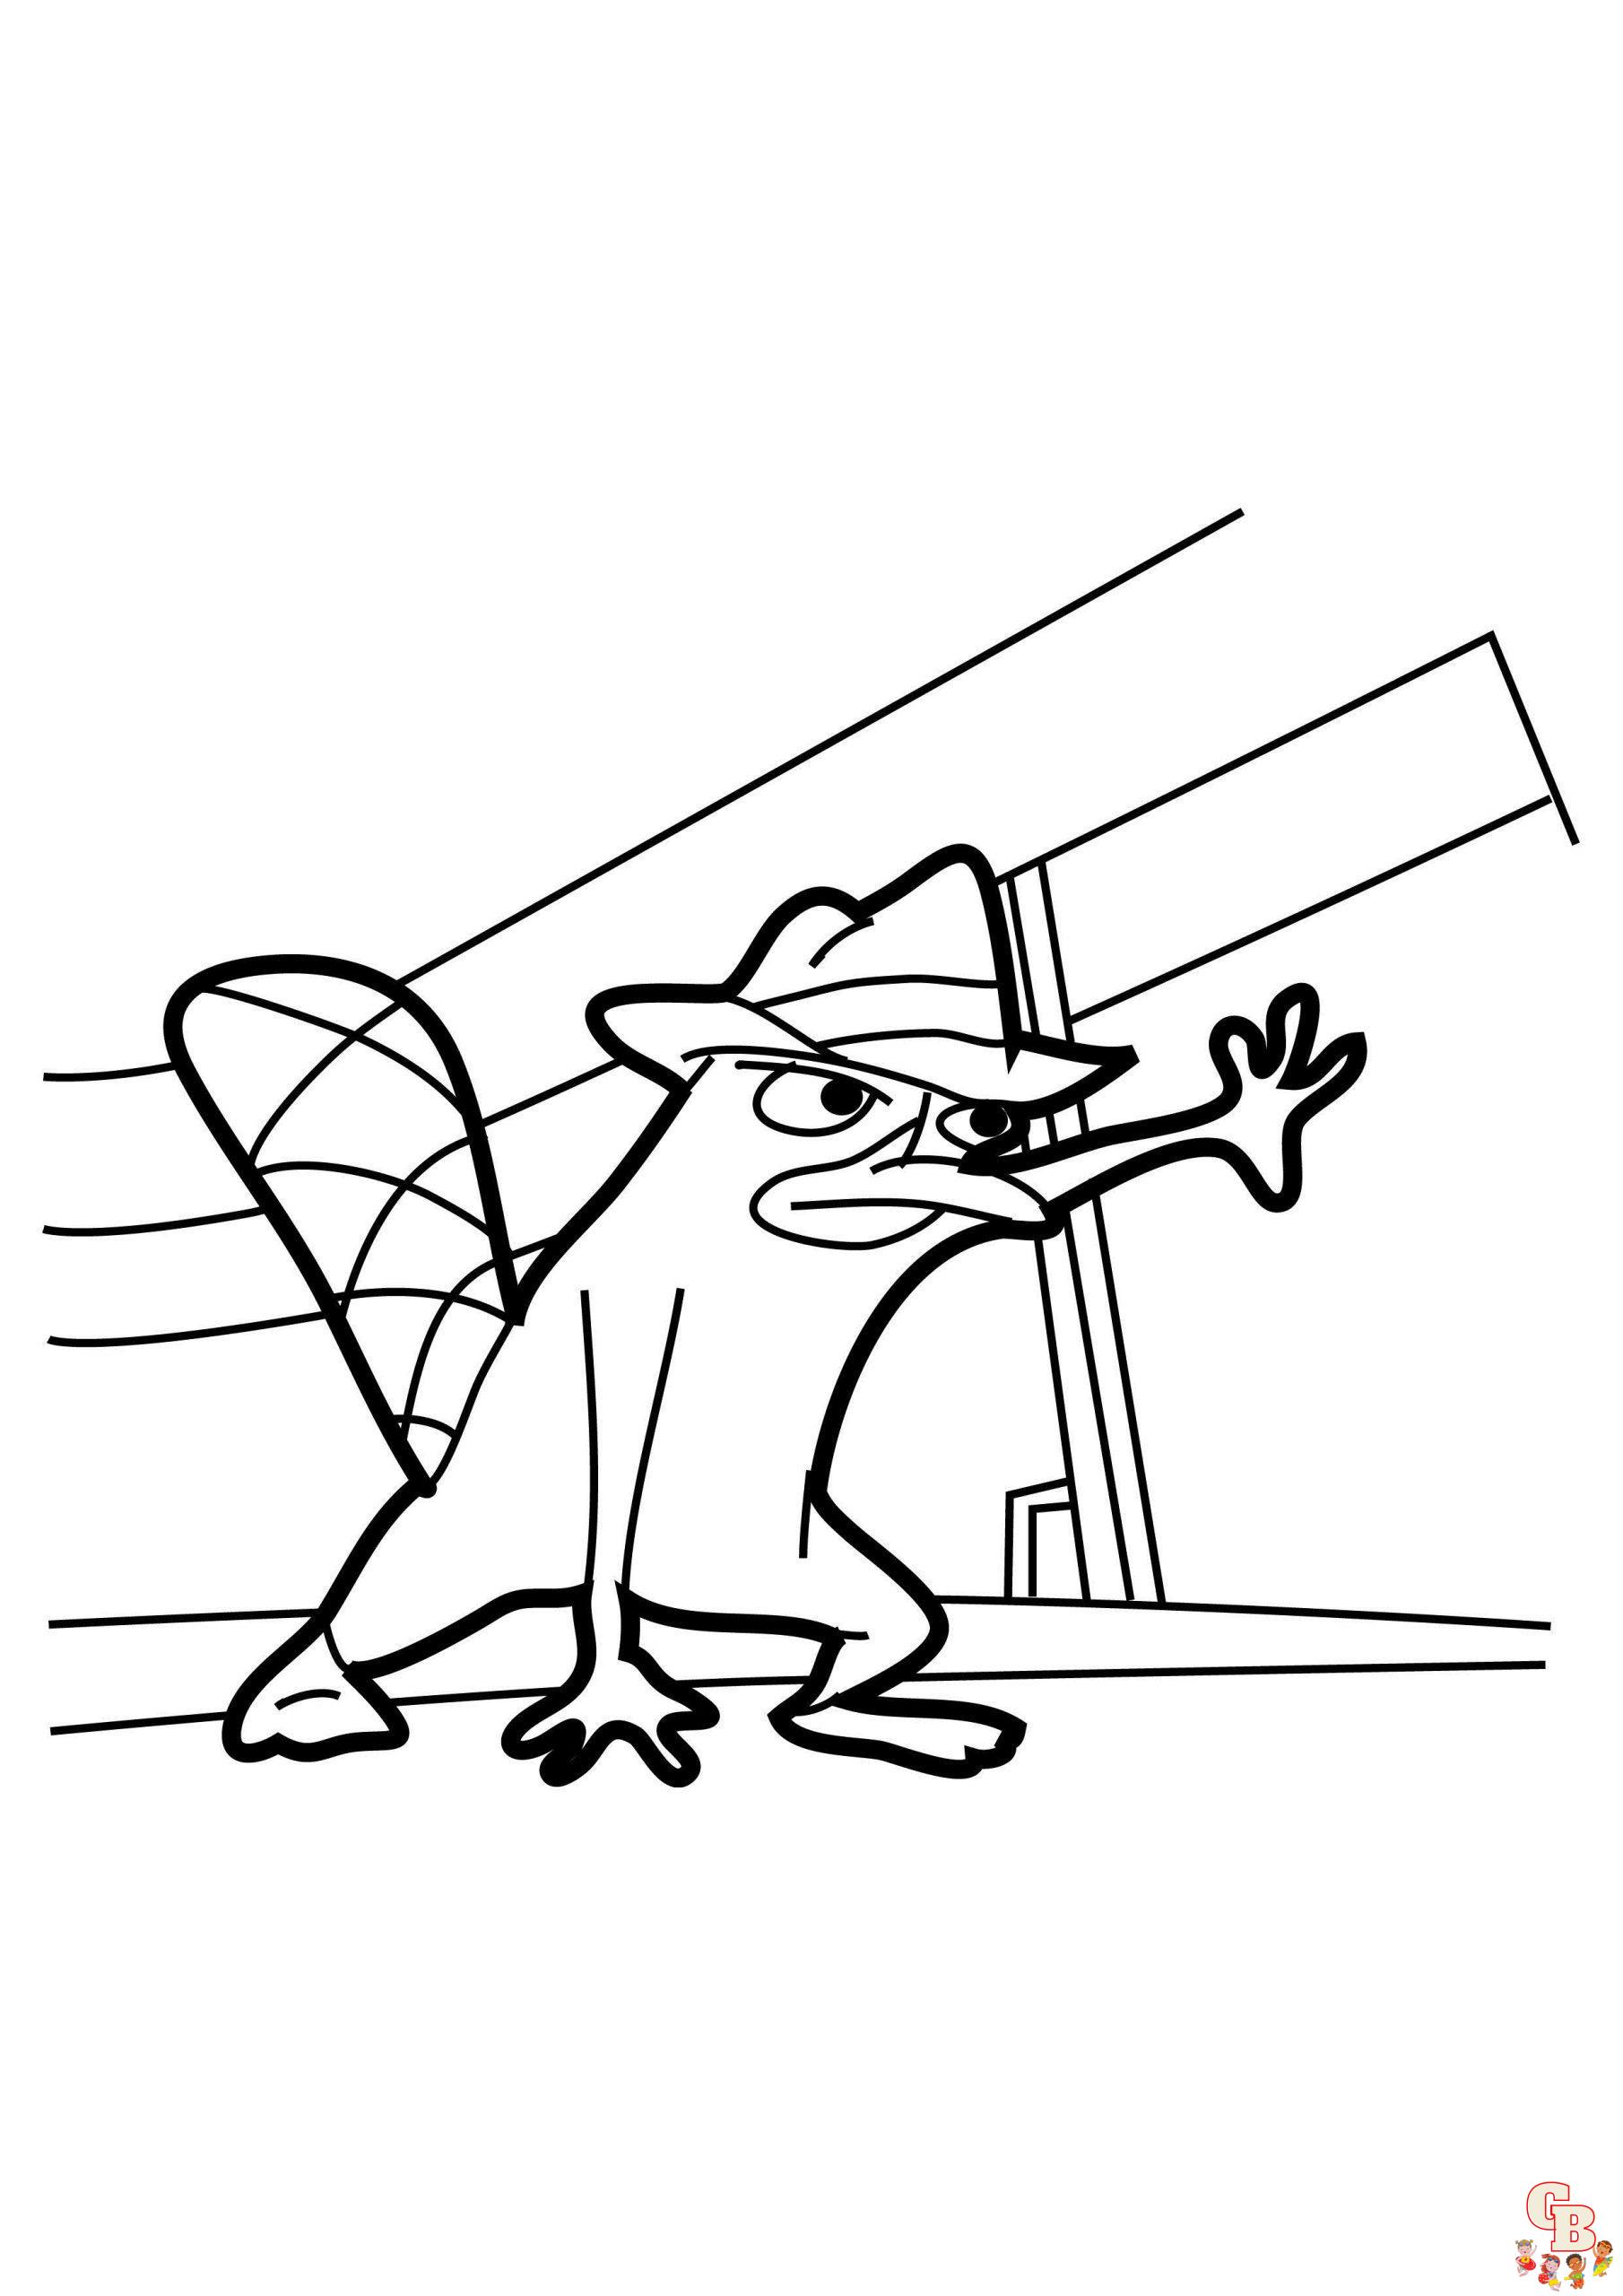 Perry the Platypus Coloring Pages